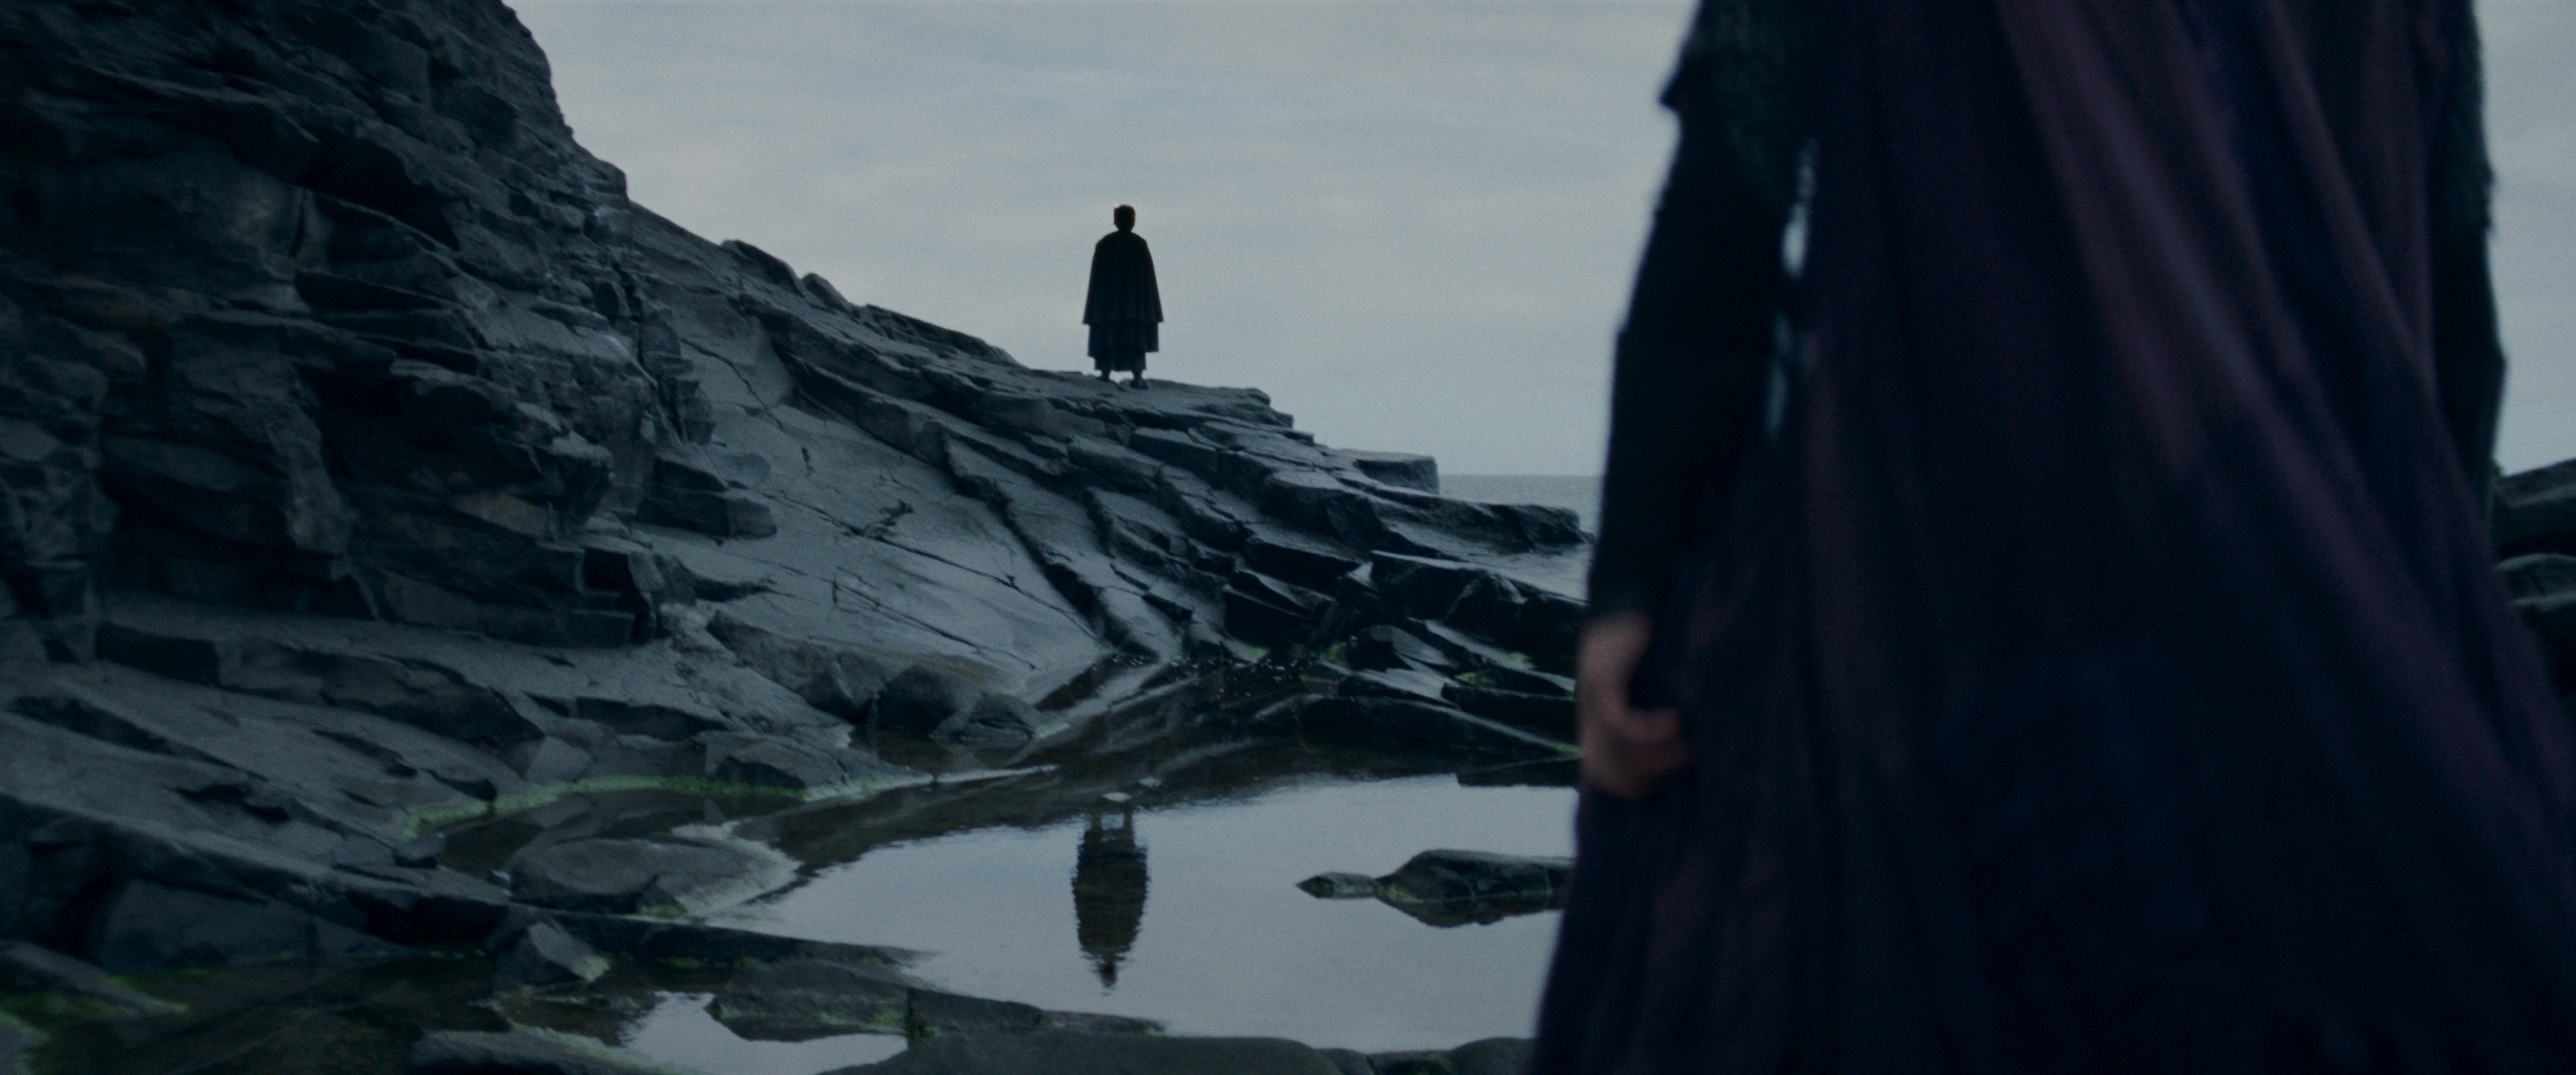 A shadowy Sith figure stands on rocks in a still from The Acolyte